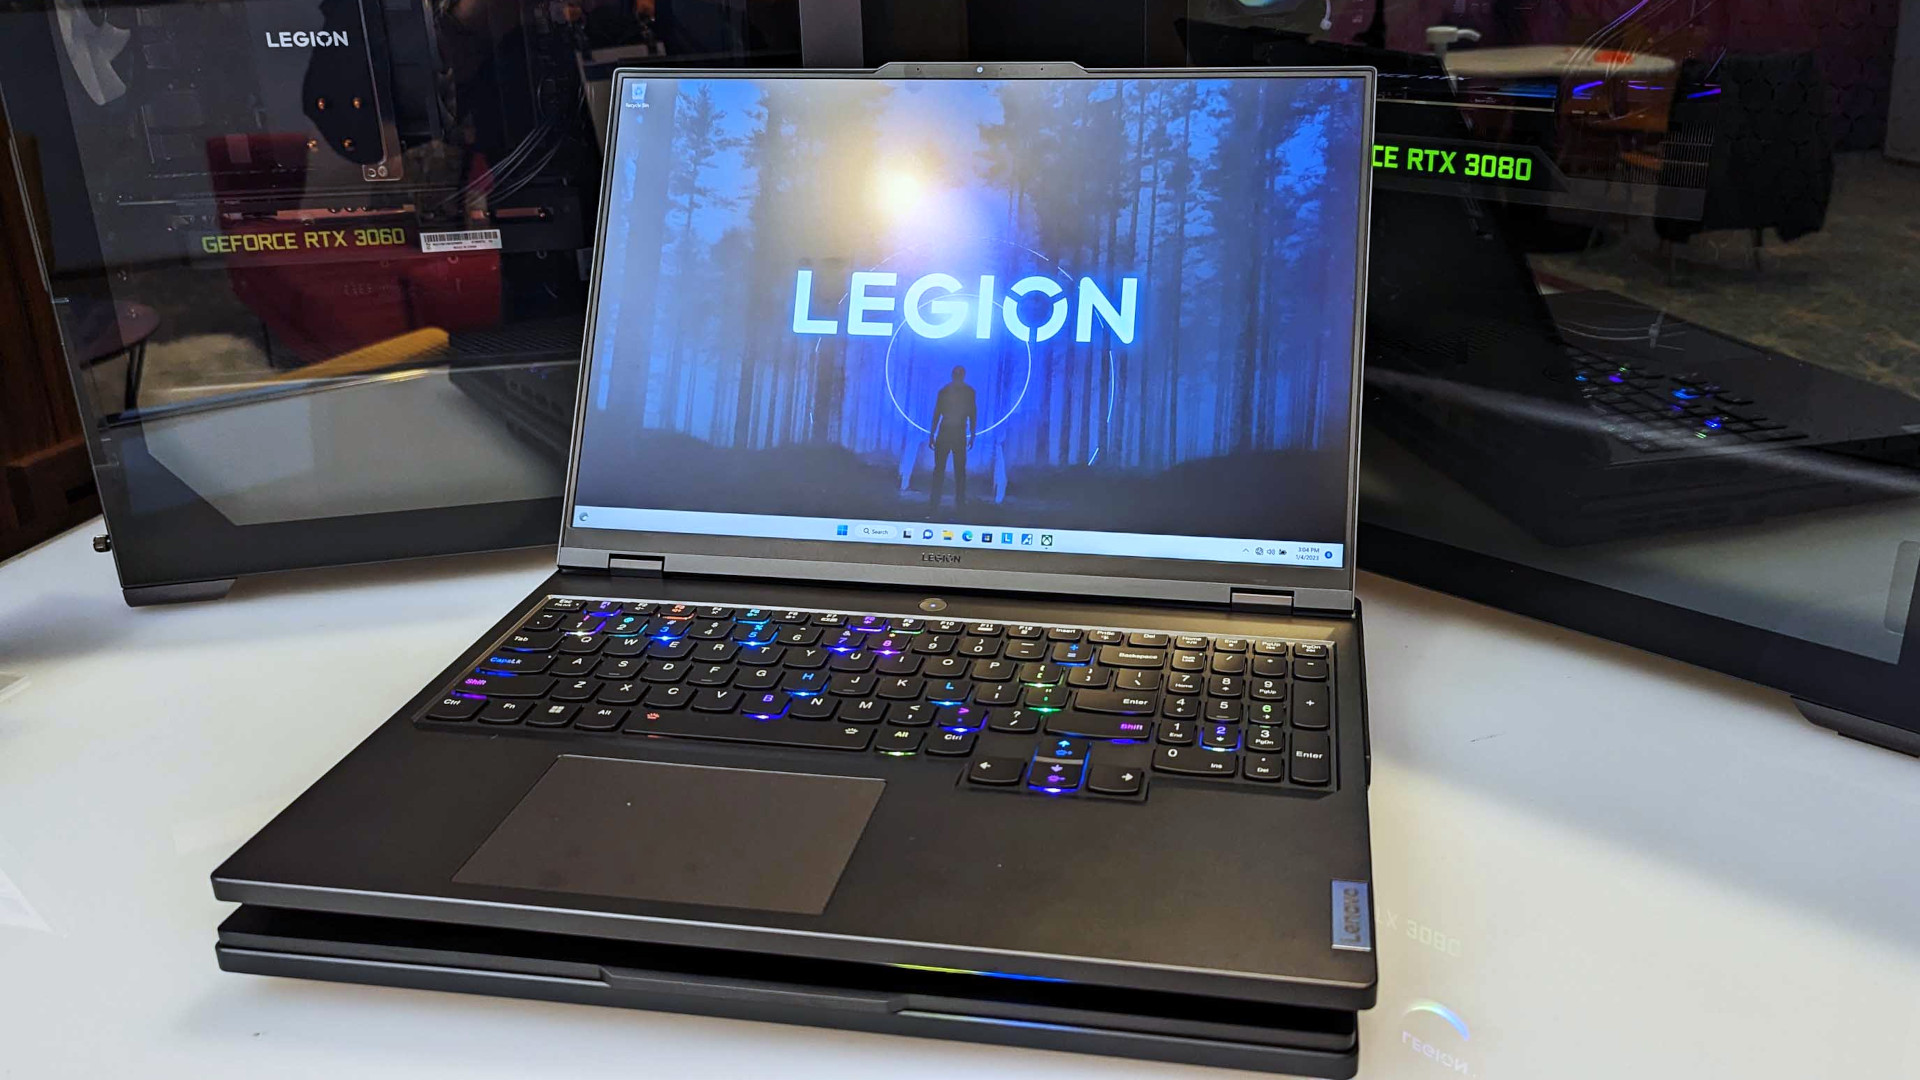 Lenovo's new Legion gaming laptops appear at CES, ready for VR and